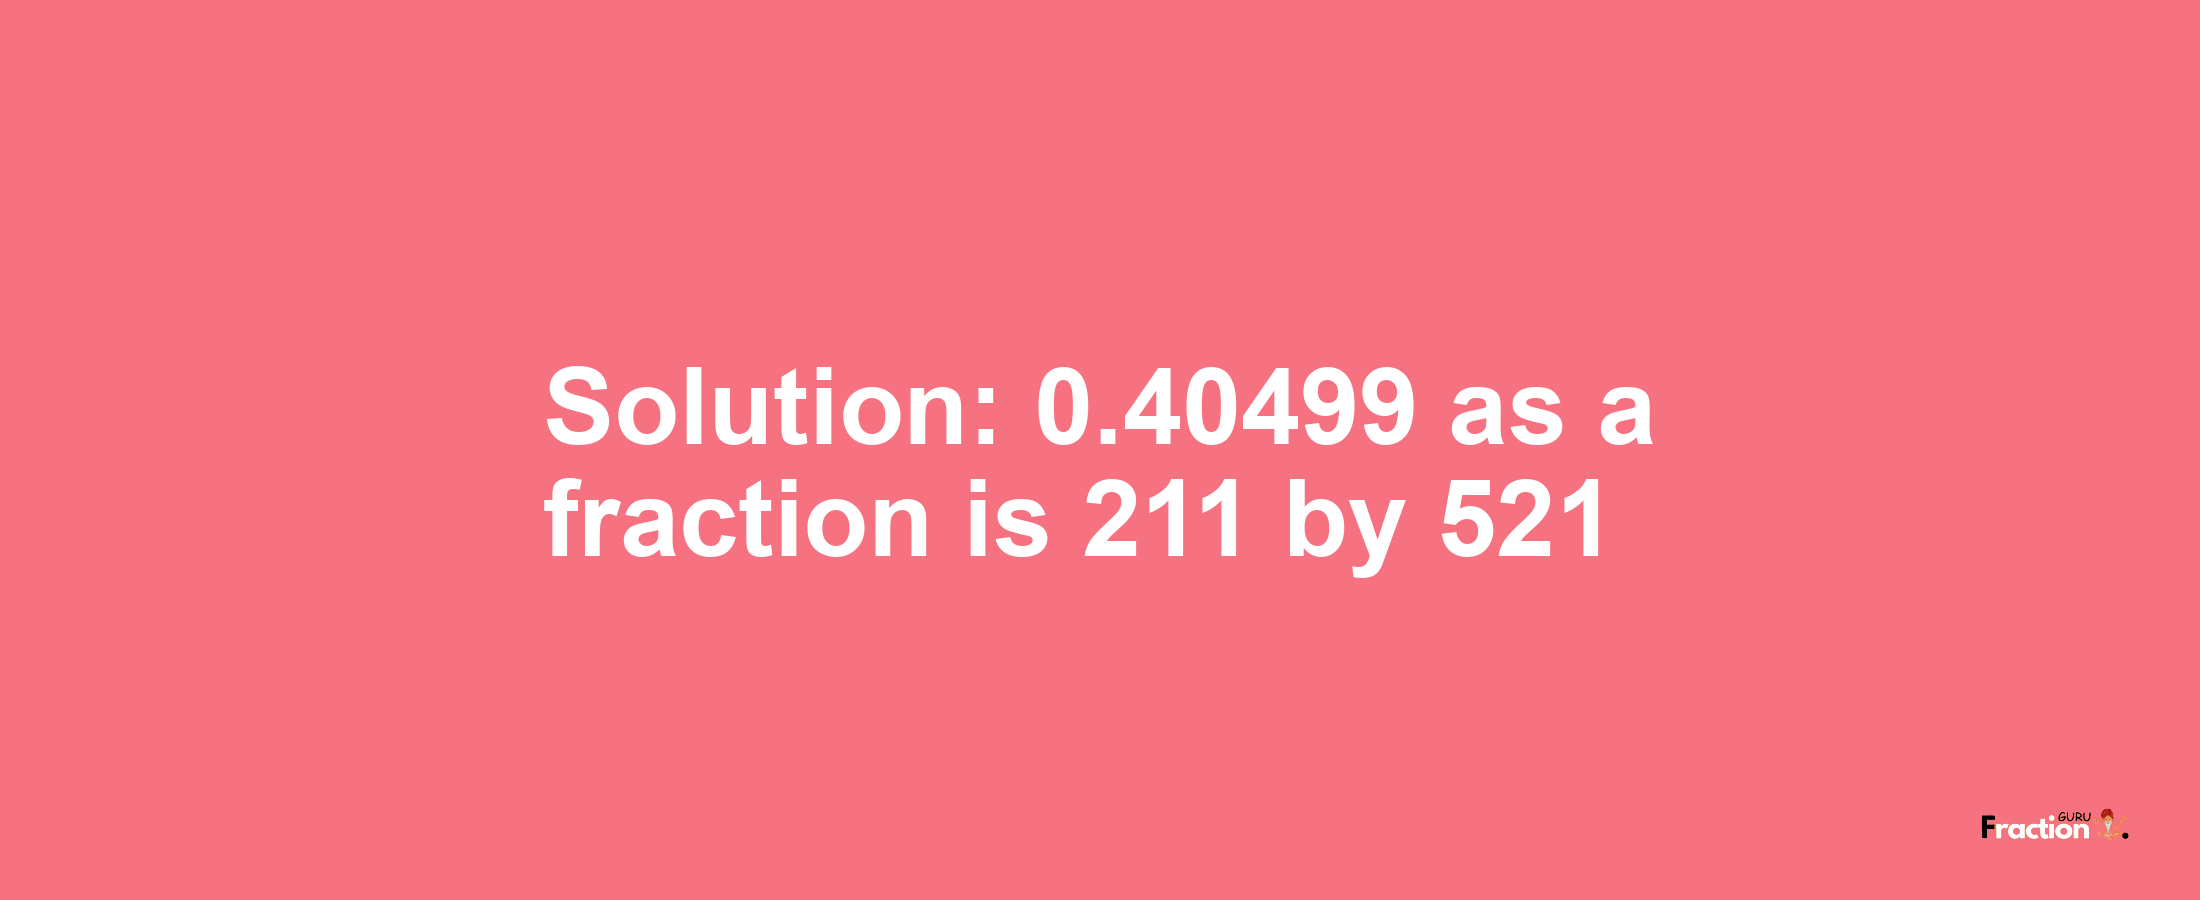 Solution:0.40499 as a fraction is 211/521